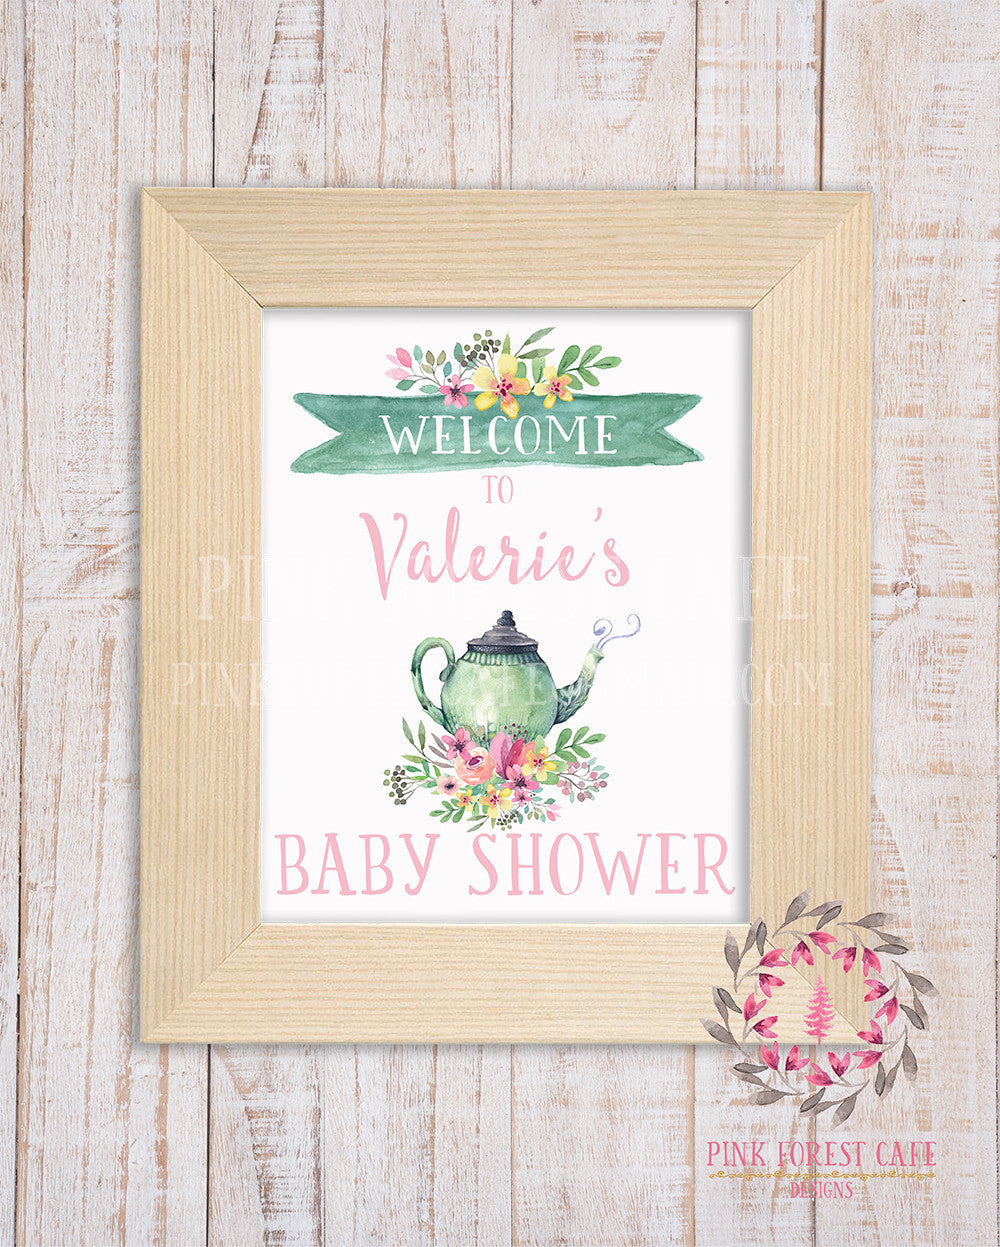 Personalized Tea Party Teapot Boho Floral Baby Bridal Shower Welcome to Birthday Party Supply Decor Printable Sign Poster Print Wall Art